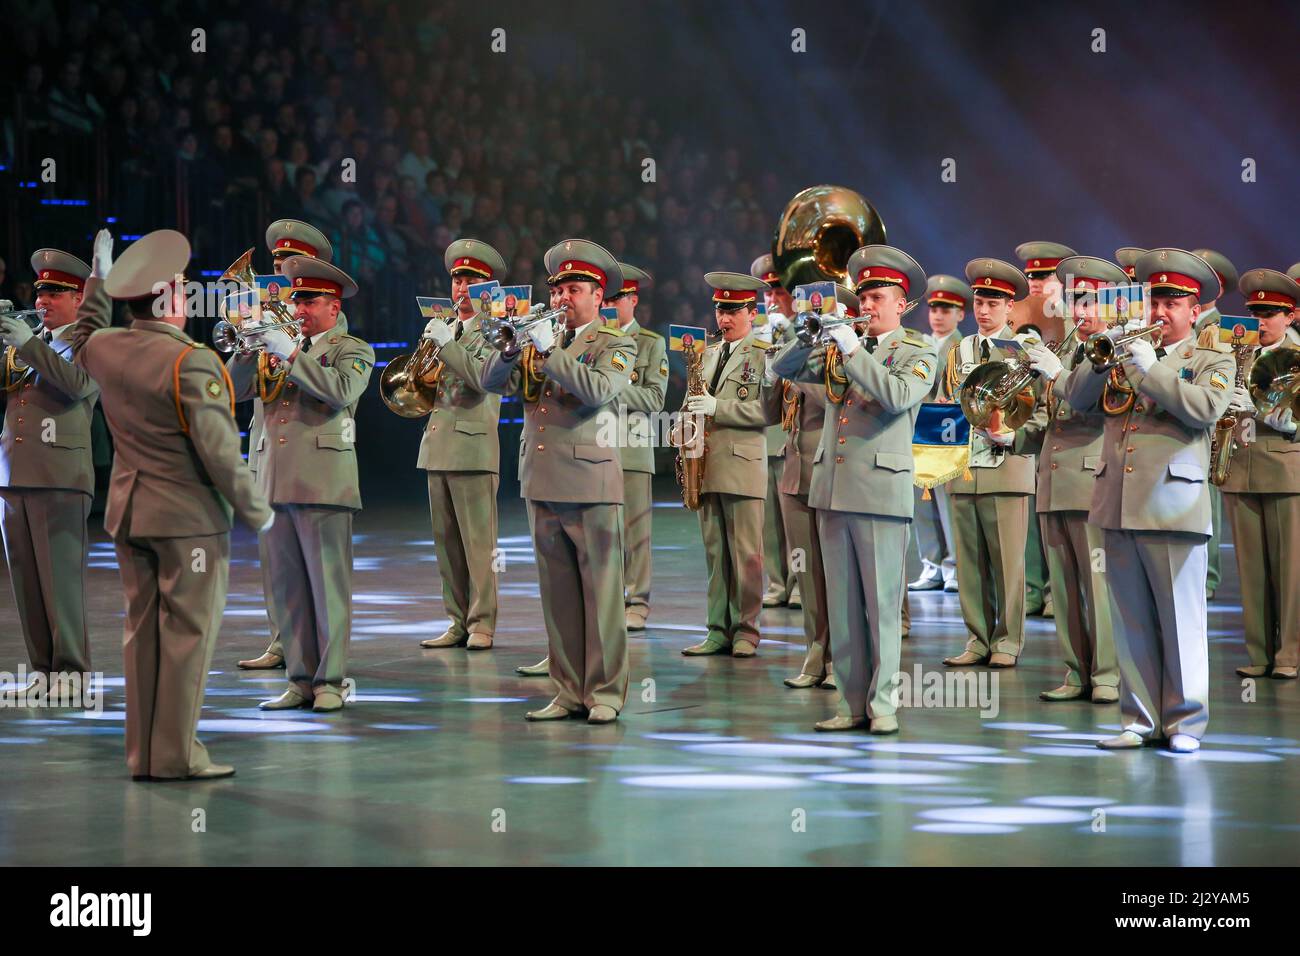 Military Band of the Ukrainian Ground Forces, short: Military Band  Chernihiv, Ukraine, at Musikparade 2017, Marching Band Show at Rittal-Arena  Wetzlar, Germany, 12th Mar, 2017 Stock Photo - Alamy